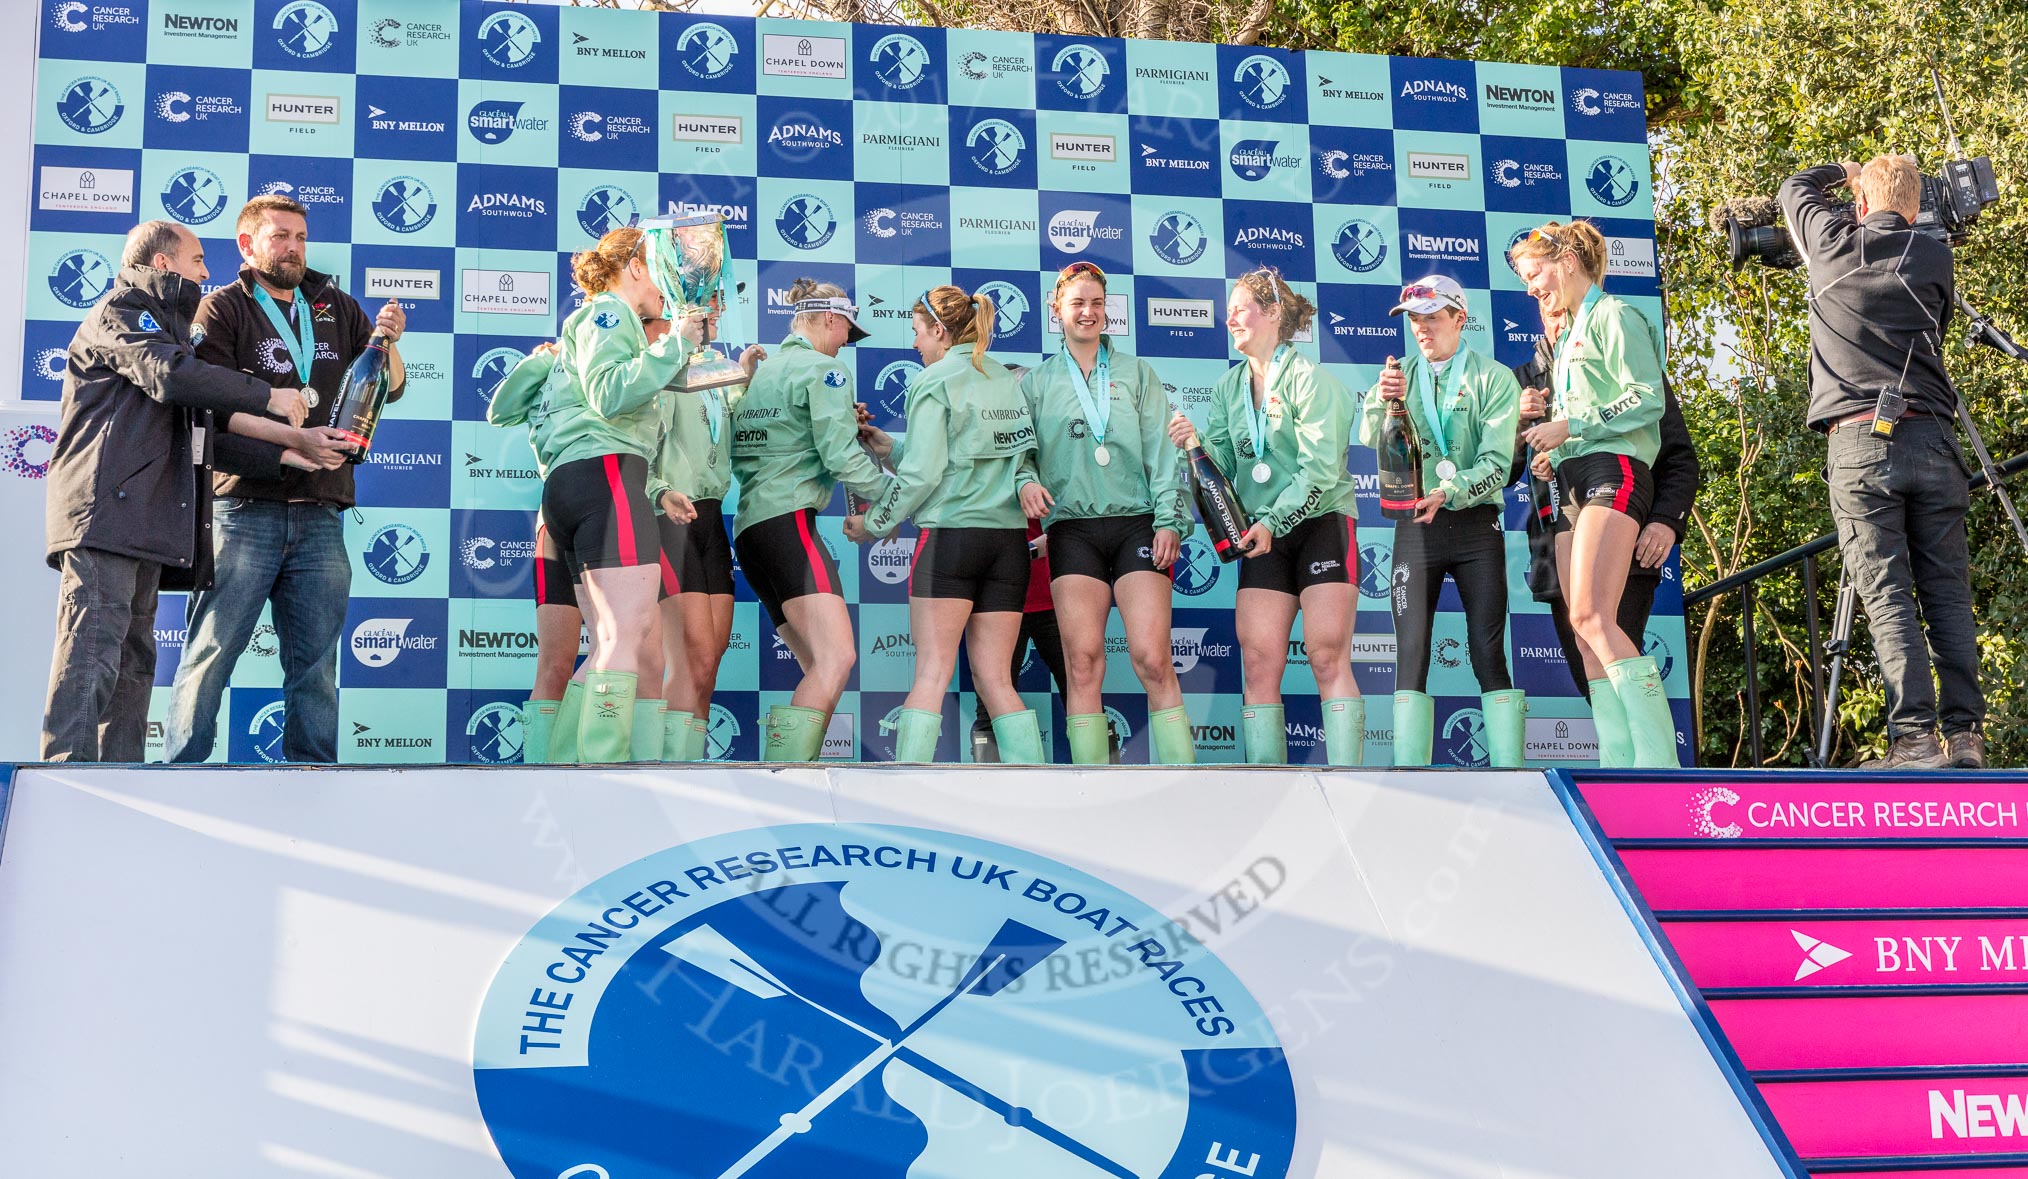 The Boat Race season 2017 -  The Cancer Research Women's Boat Race: CUWBC about to spray the Champagne at the price giving.
River Thames between Putney Bridge and Mortlake,
London SW15,

United Kingdom,
on 02 April 2017 at 17:13, image #255